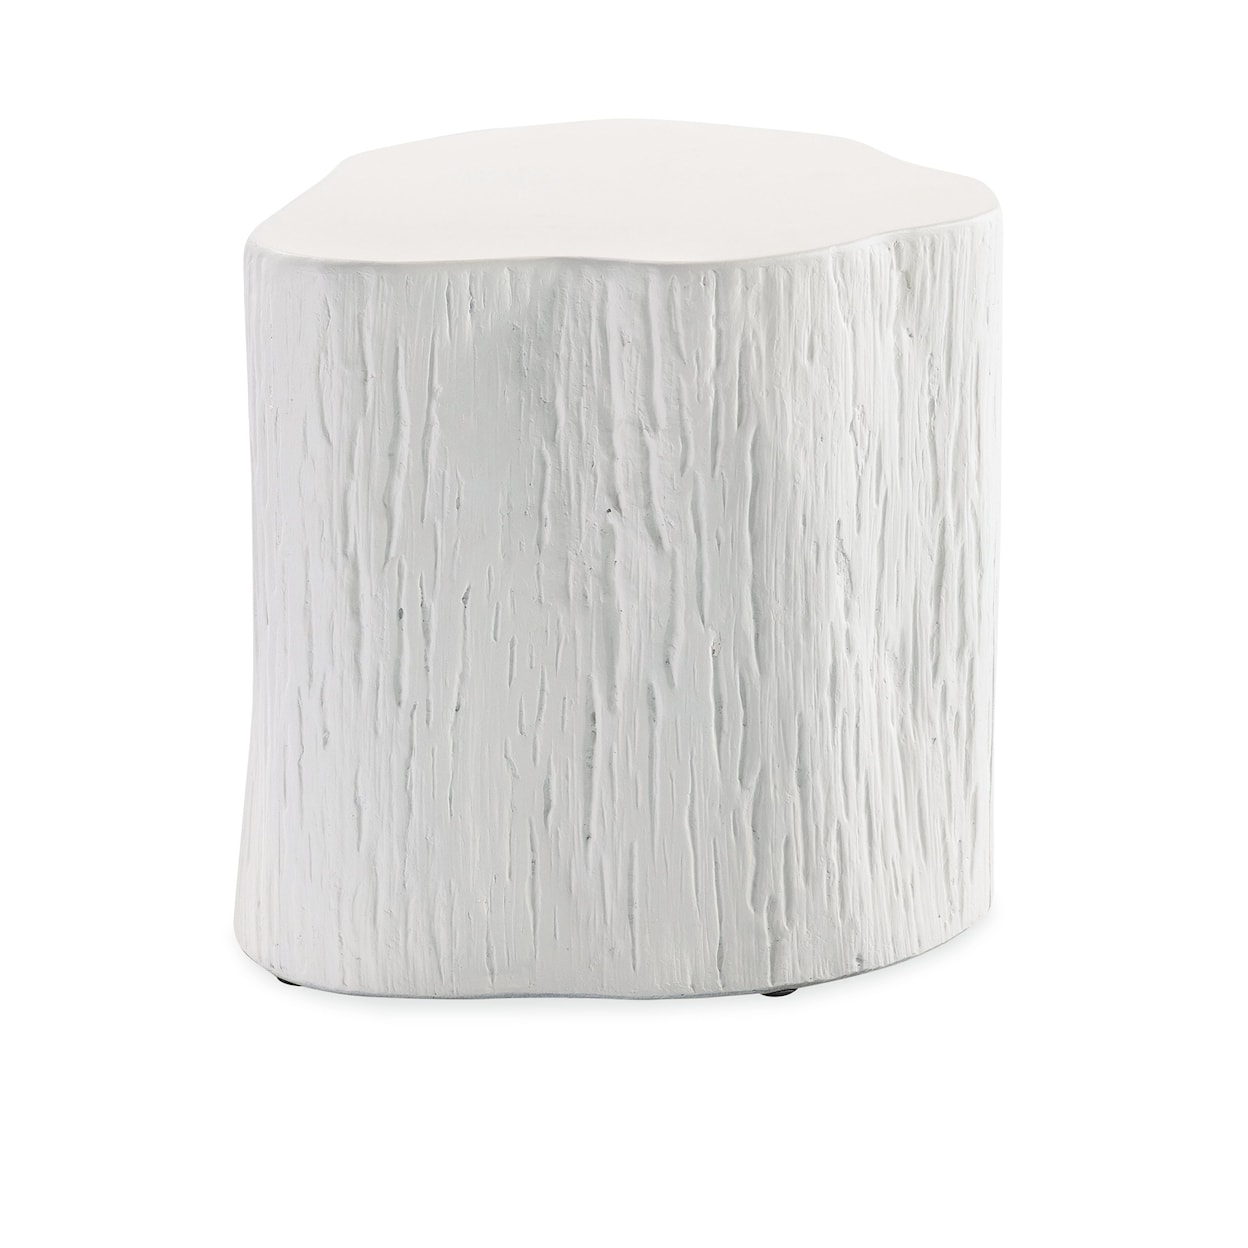 Sunset West The Bazaar Outdoor Tree Trunk End Table